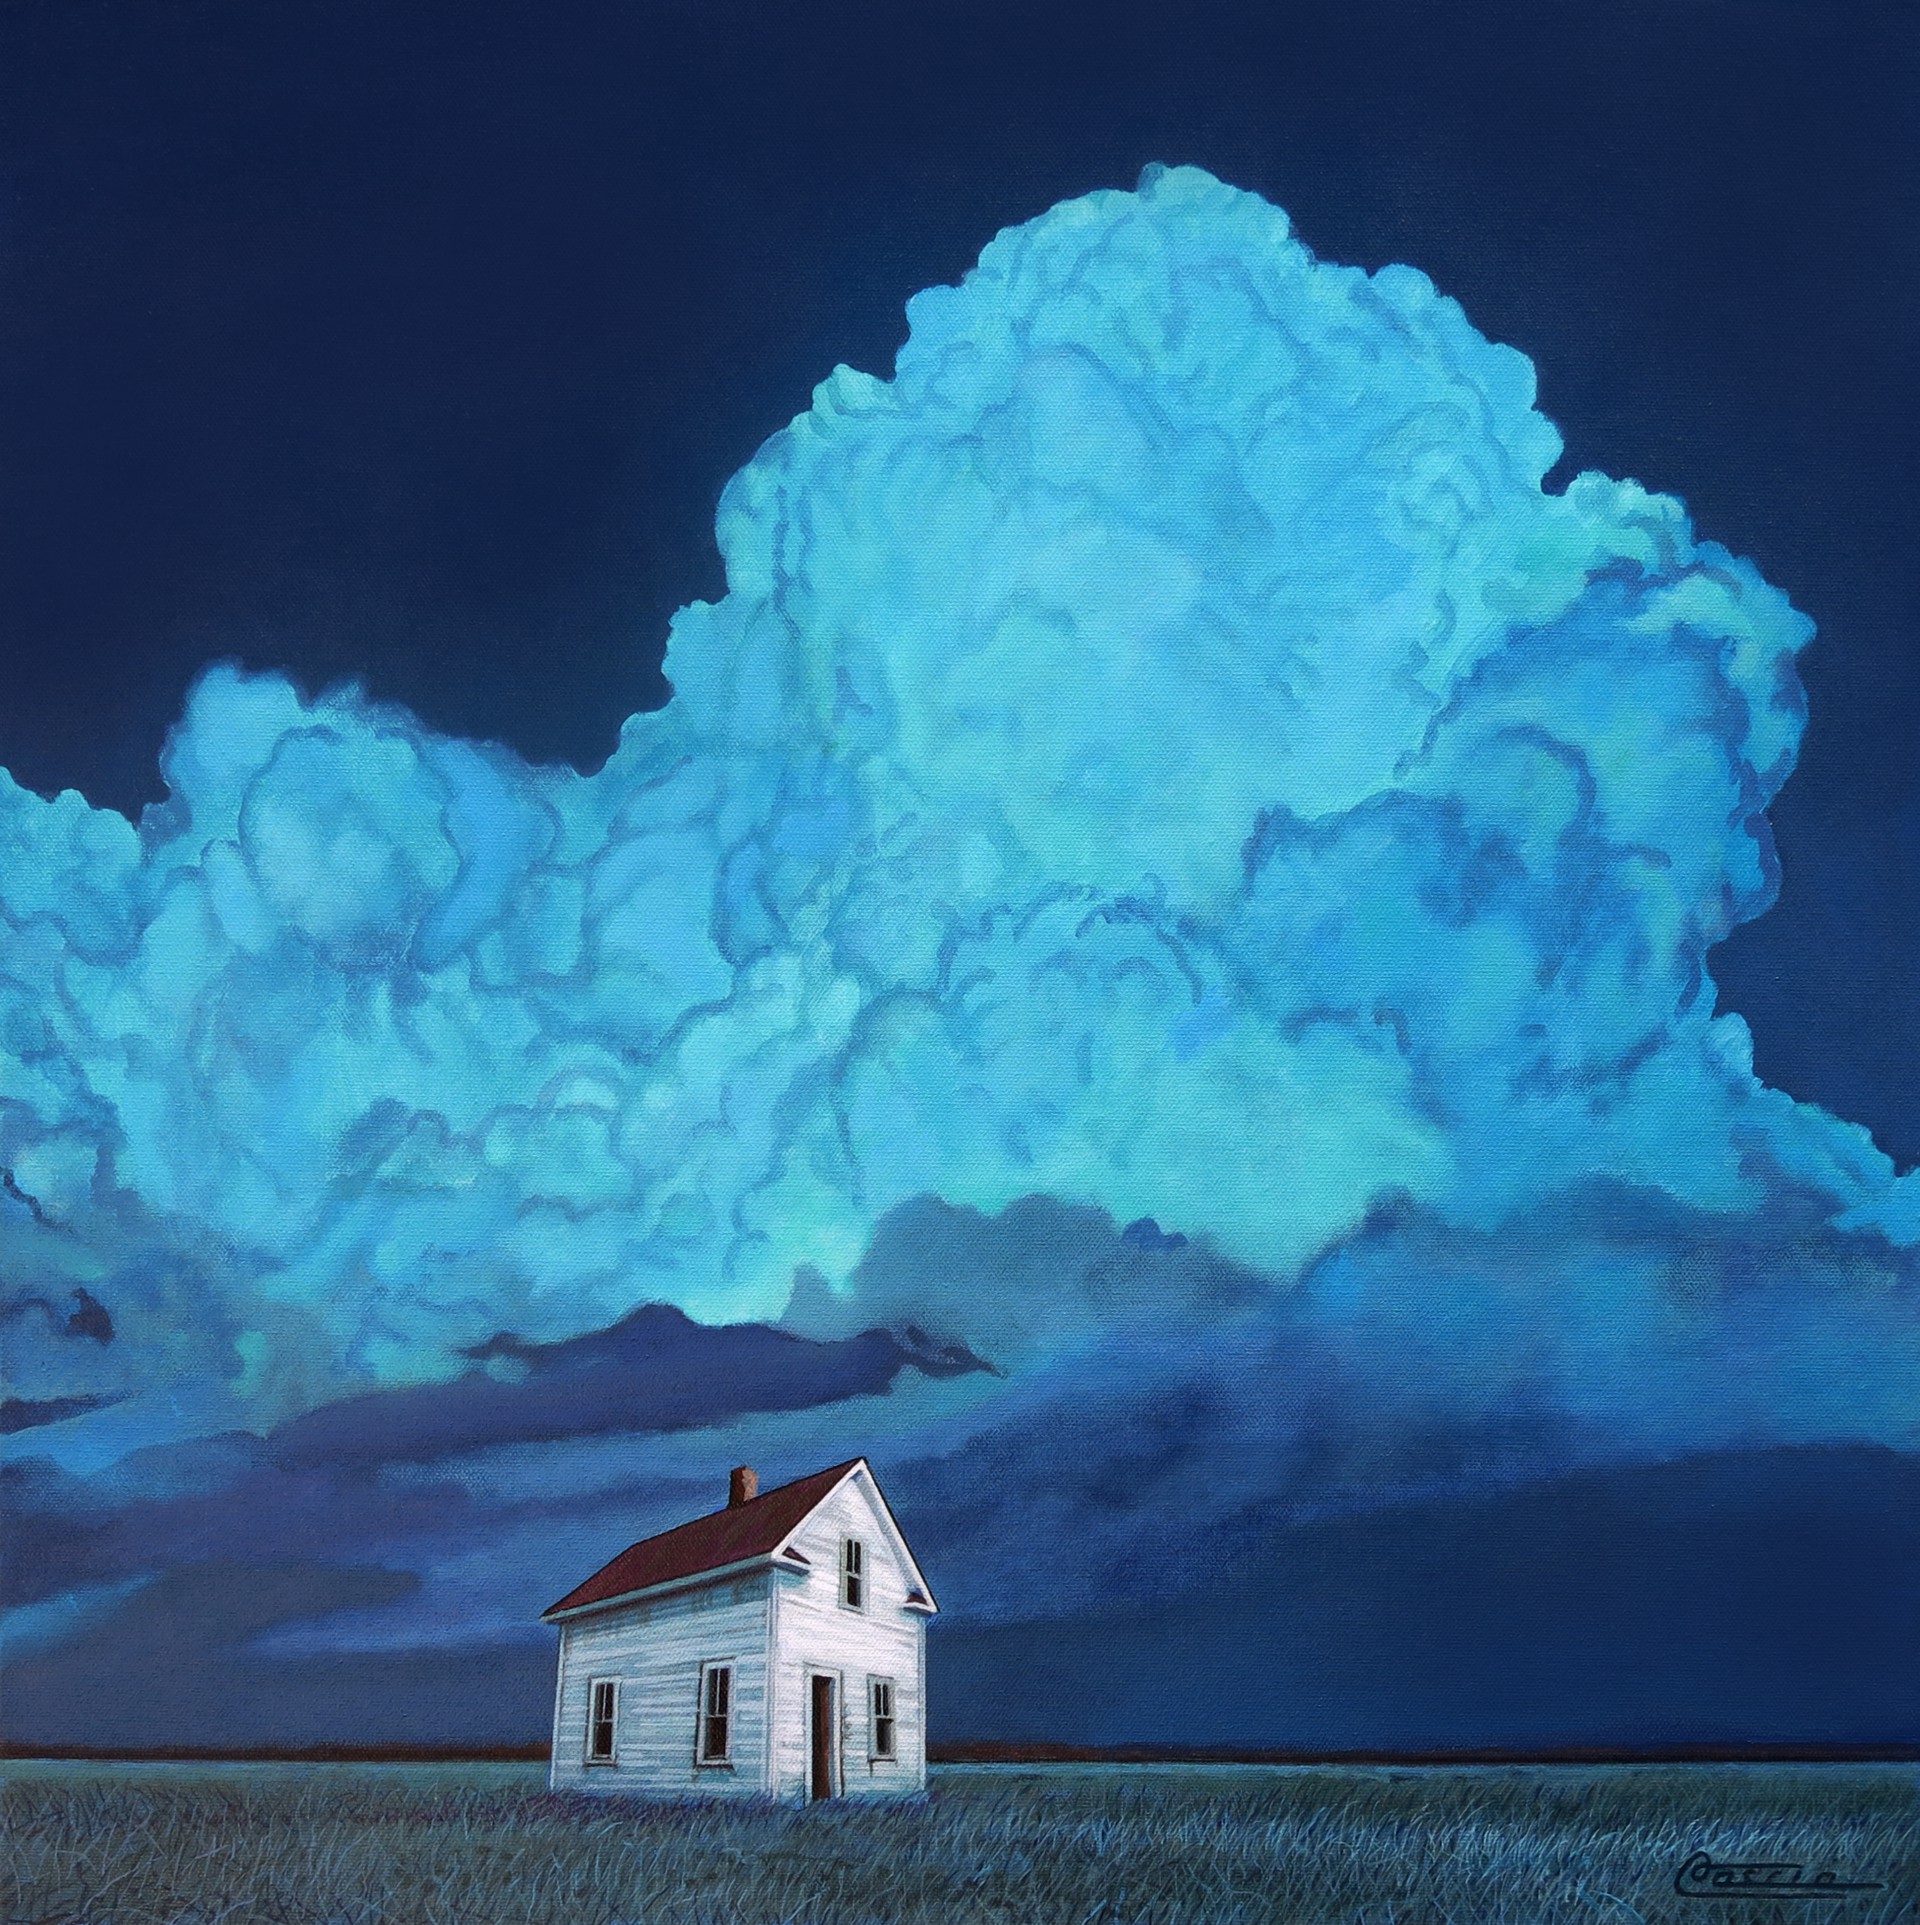 Evening Thunder by Bruce Cascia